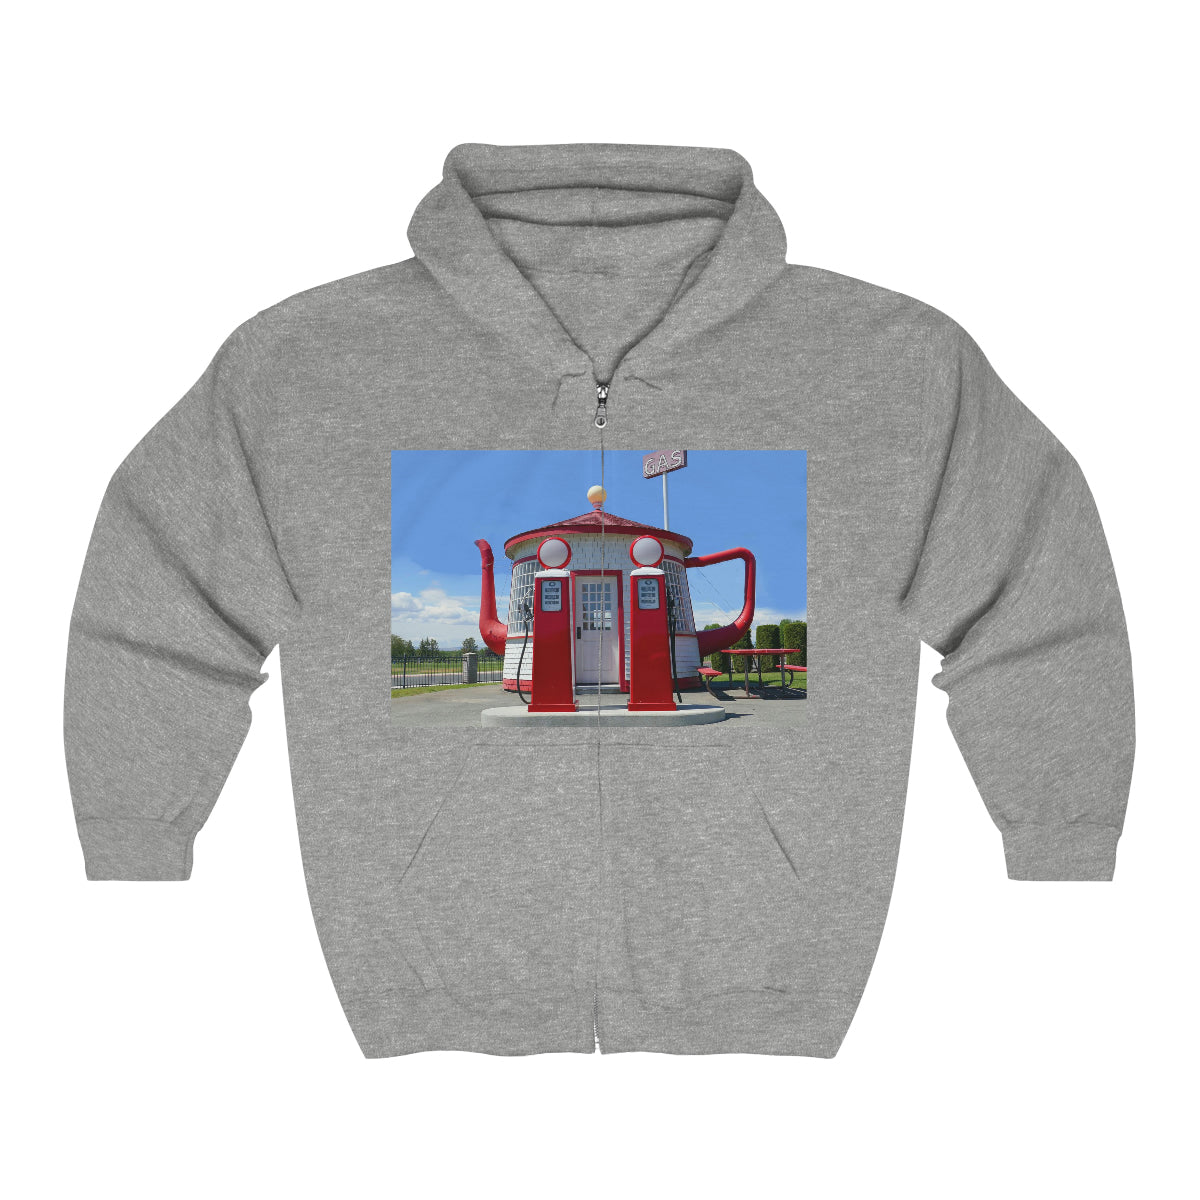 Awesome Teapot Dome Service Station - Unisex Heavy Blend Full Zip Hooded Sweatshirt - Fry1Productions